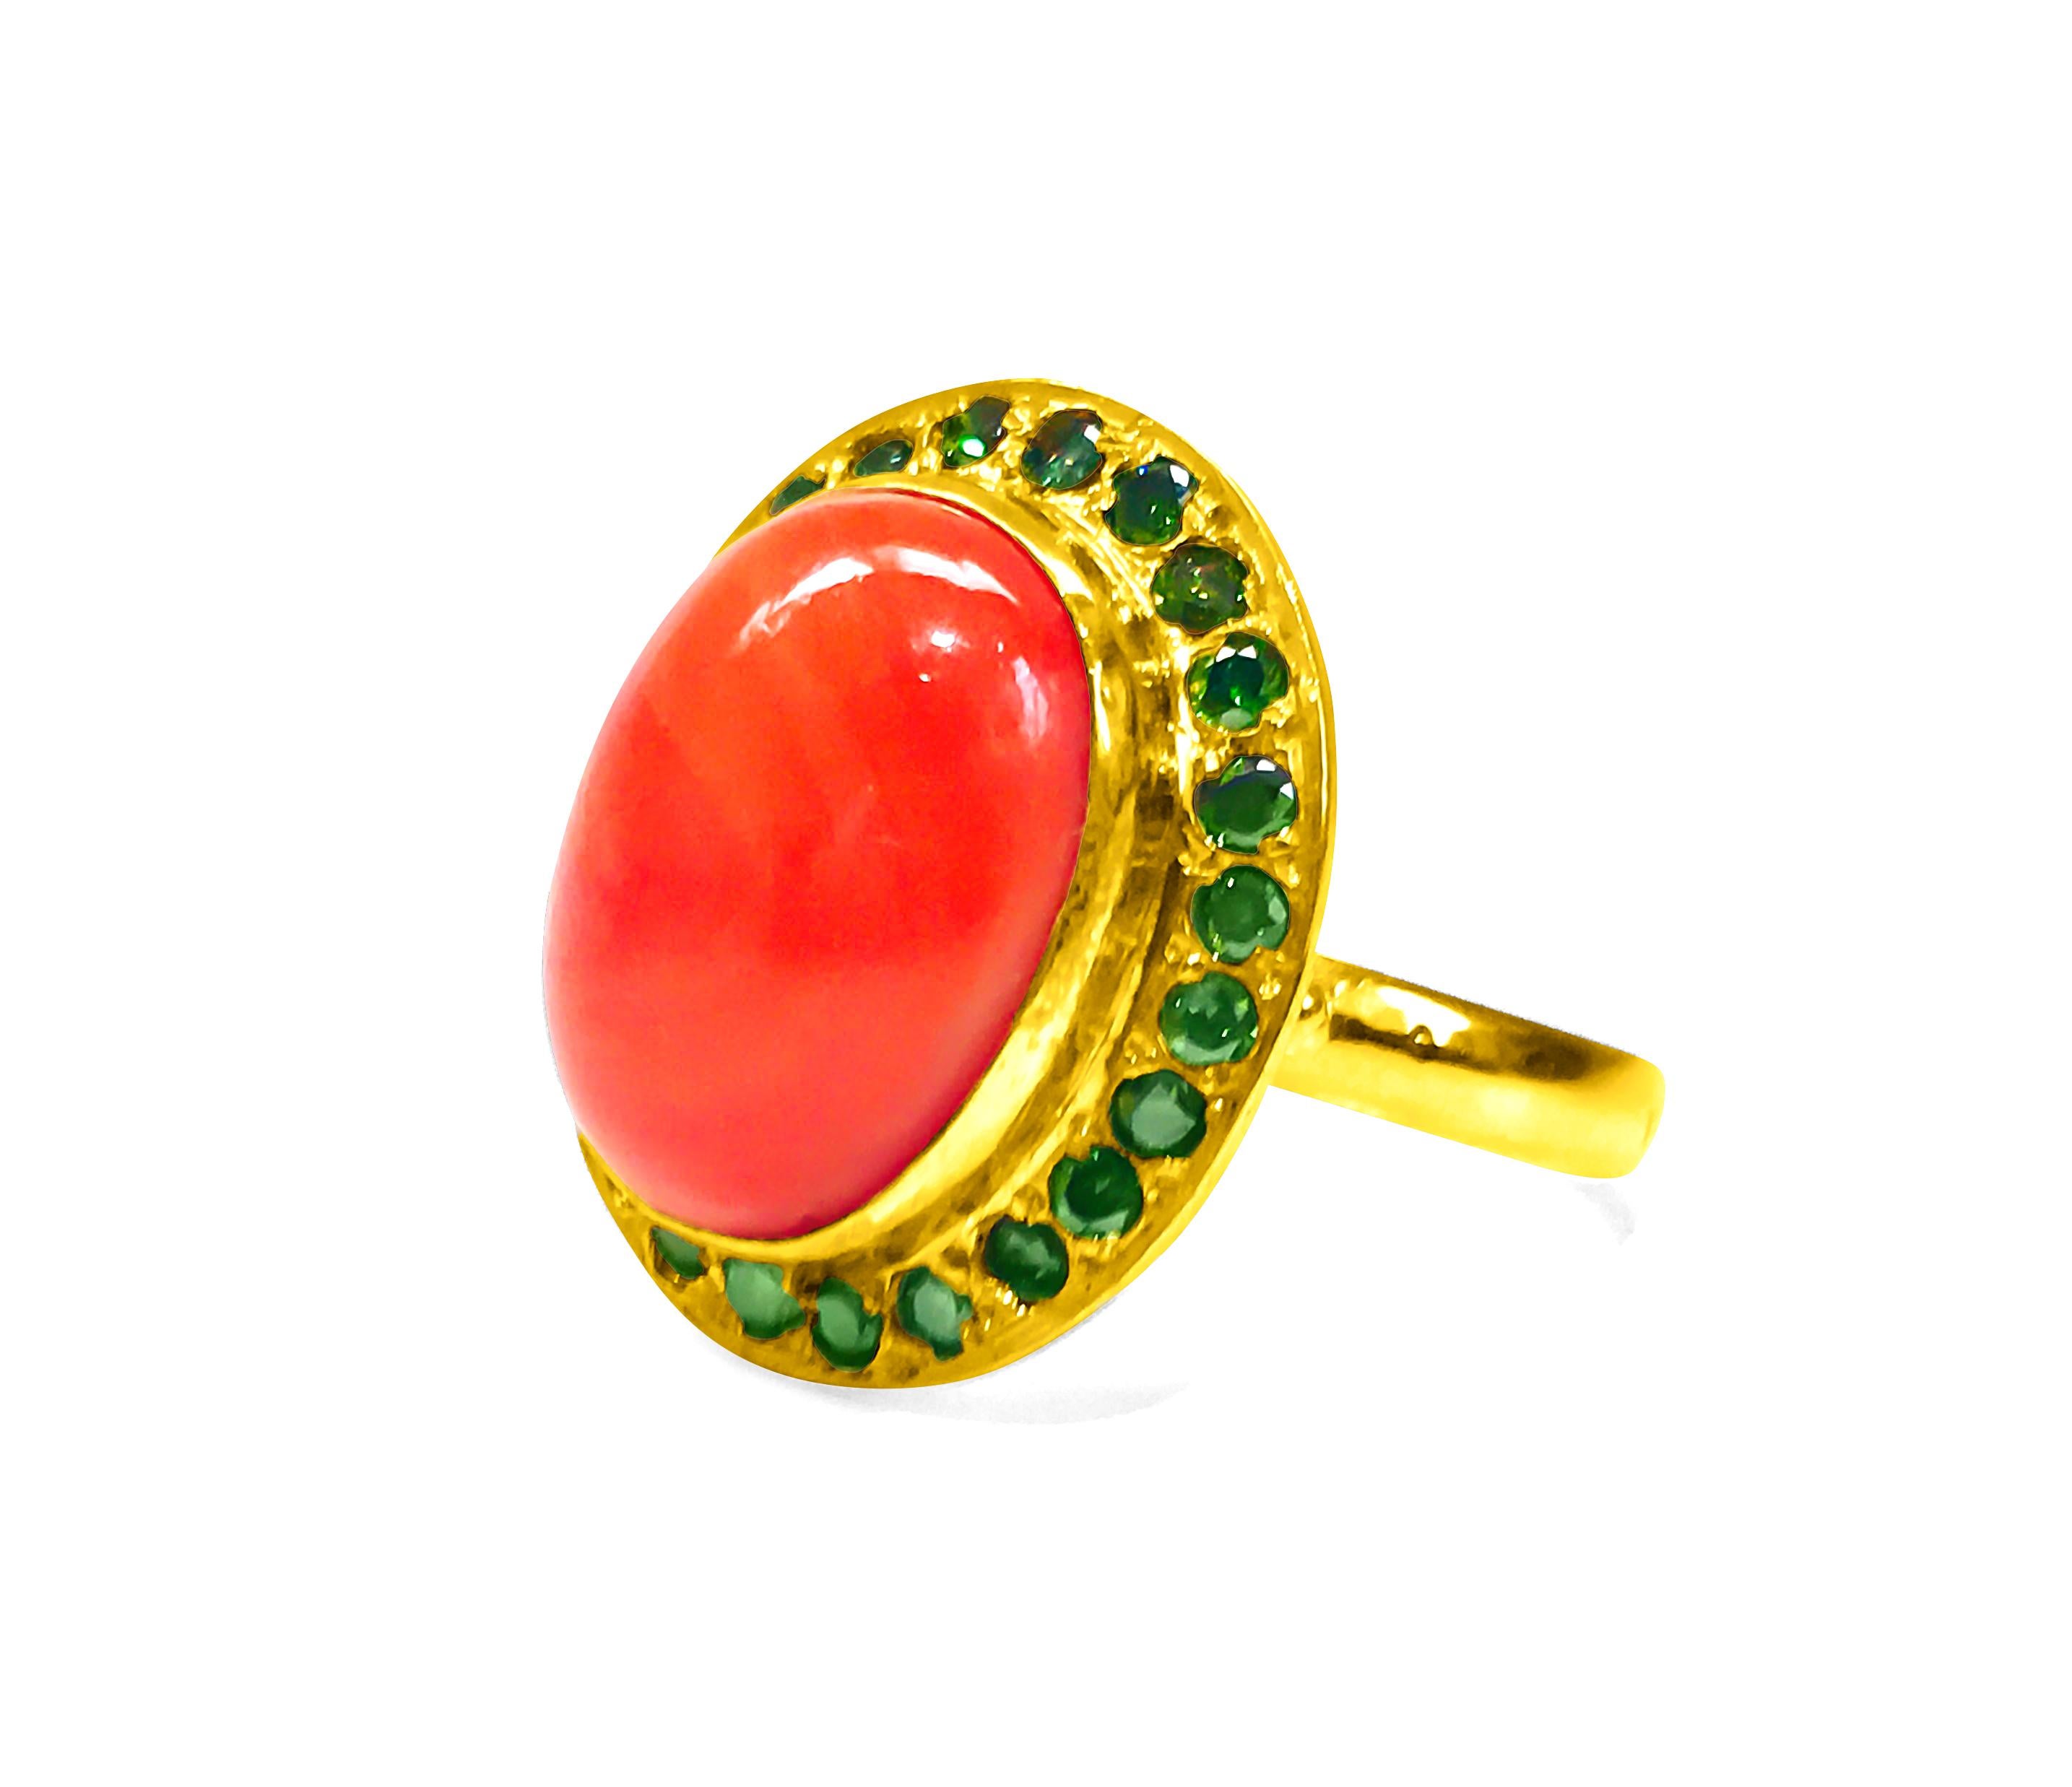  Metal: 21K Yellow Gold. 
5.50 carat natural coral, cabochon cut. 
1.00 carat diamonds. SI clarity - Fancy green color. Round brilliant cut. 
Center Stone set in bezel setting and the diamonds set in bead setting. 
Certified by GIA graduate